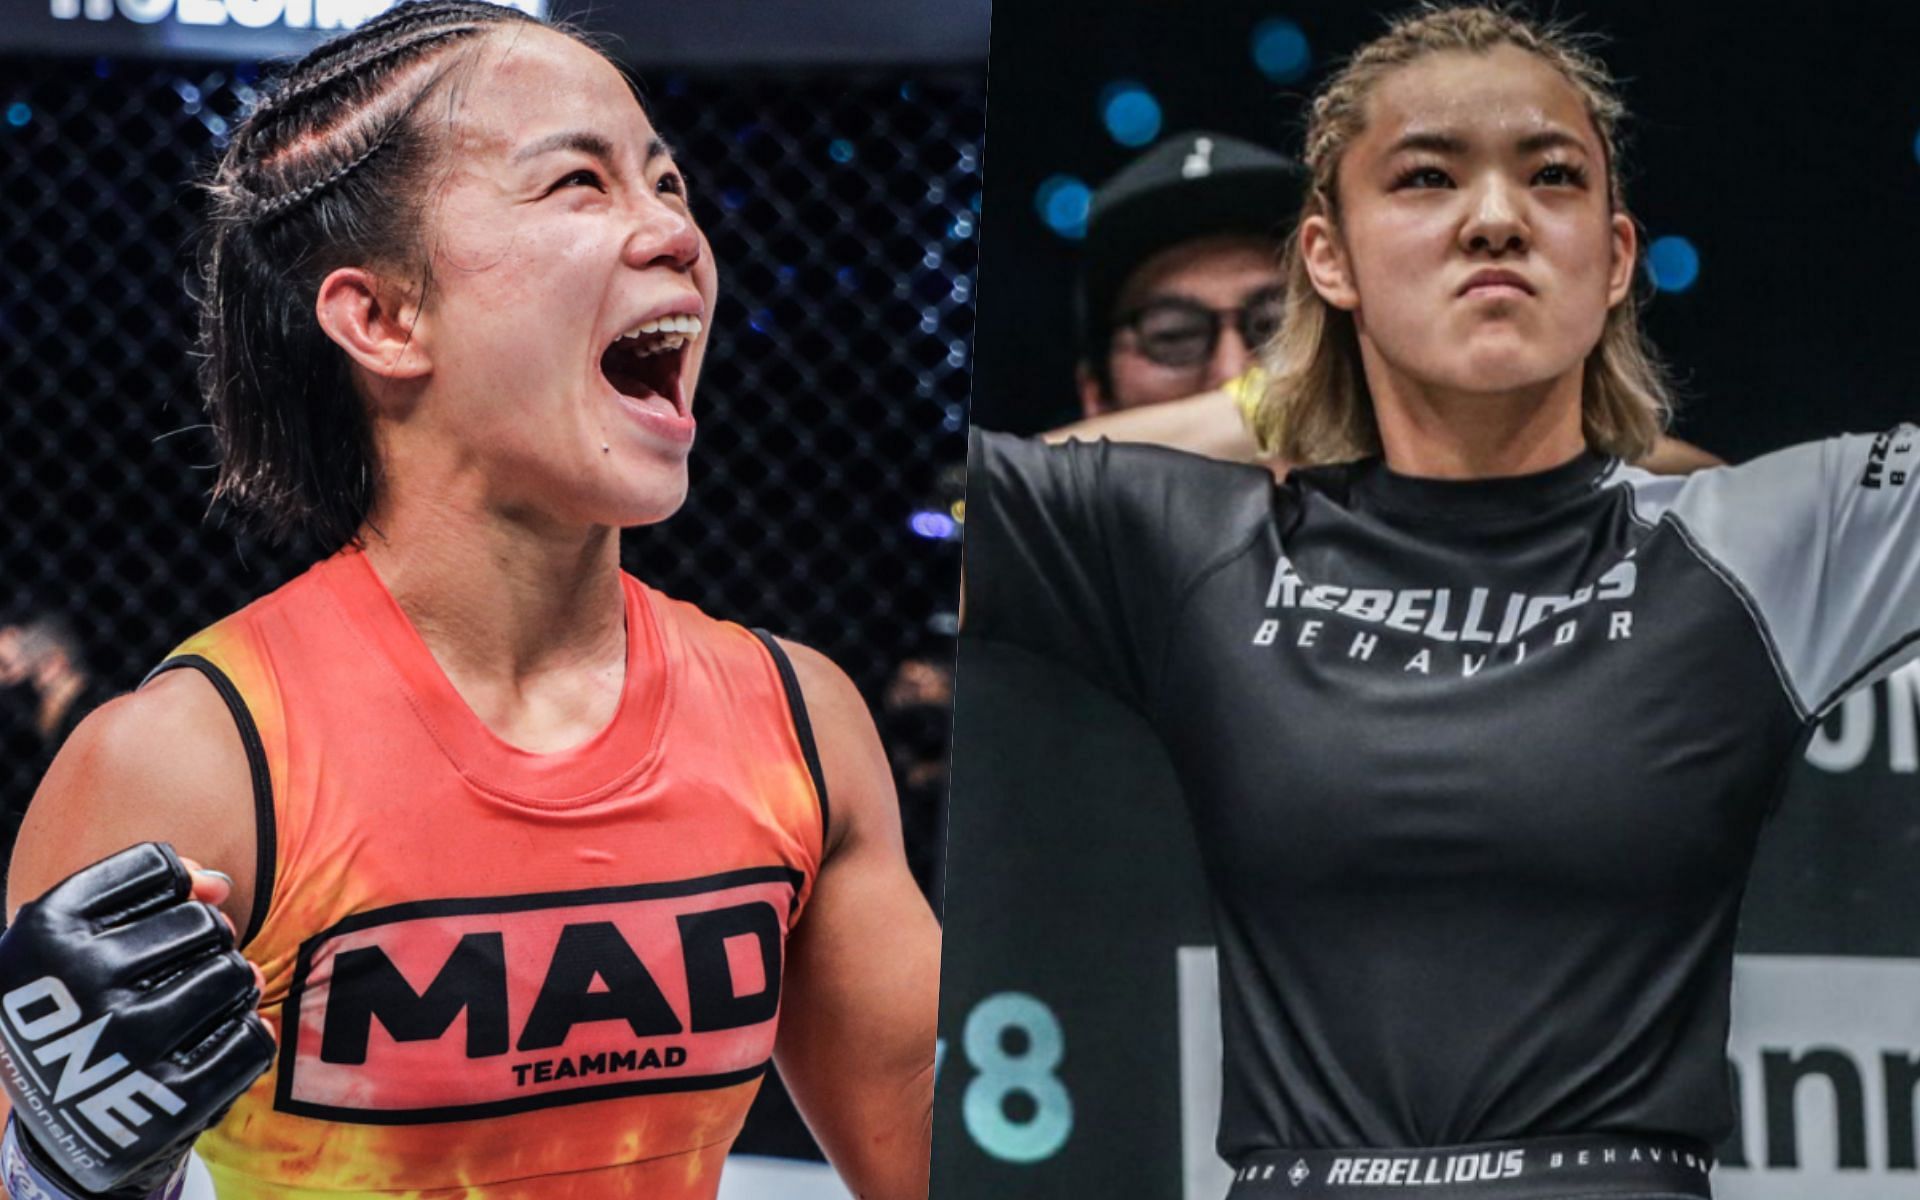 Ham Seo Hee (L) could give Itsuki Hirata (R) a rude awakening at ONE Fight Night 8. | Photo by ONE Championship